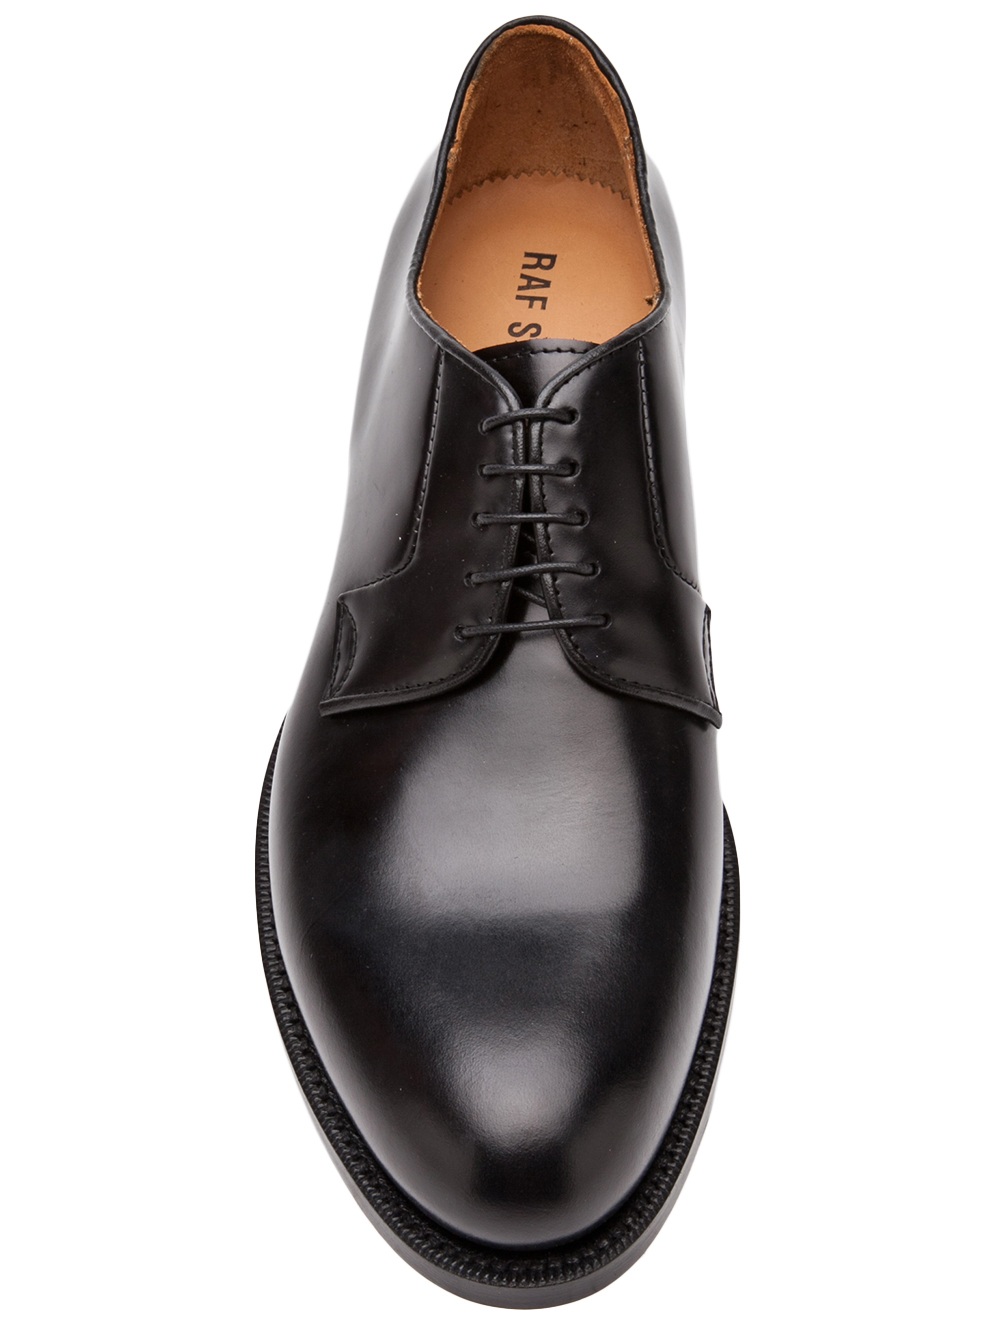 Lyst - Raf Simons Laceup Dress Shoes in Black for Men